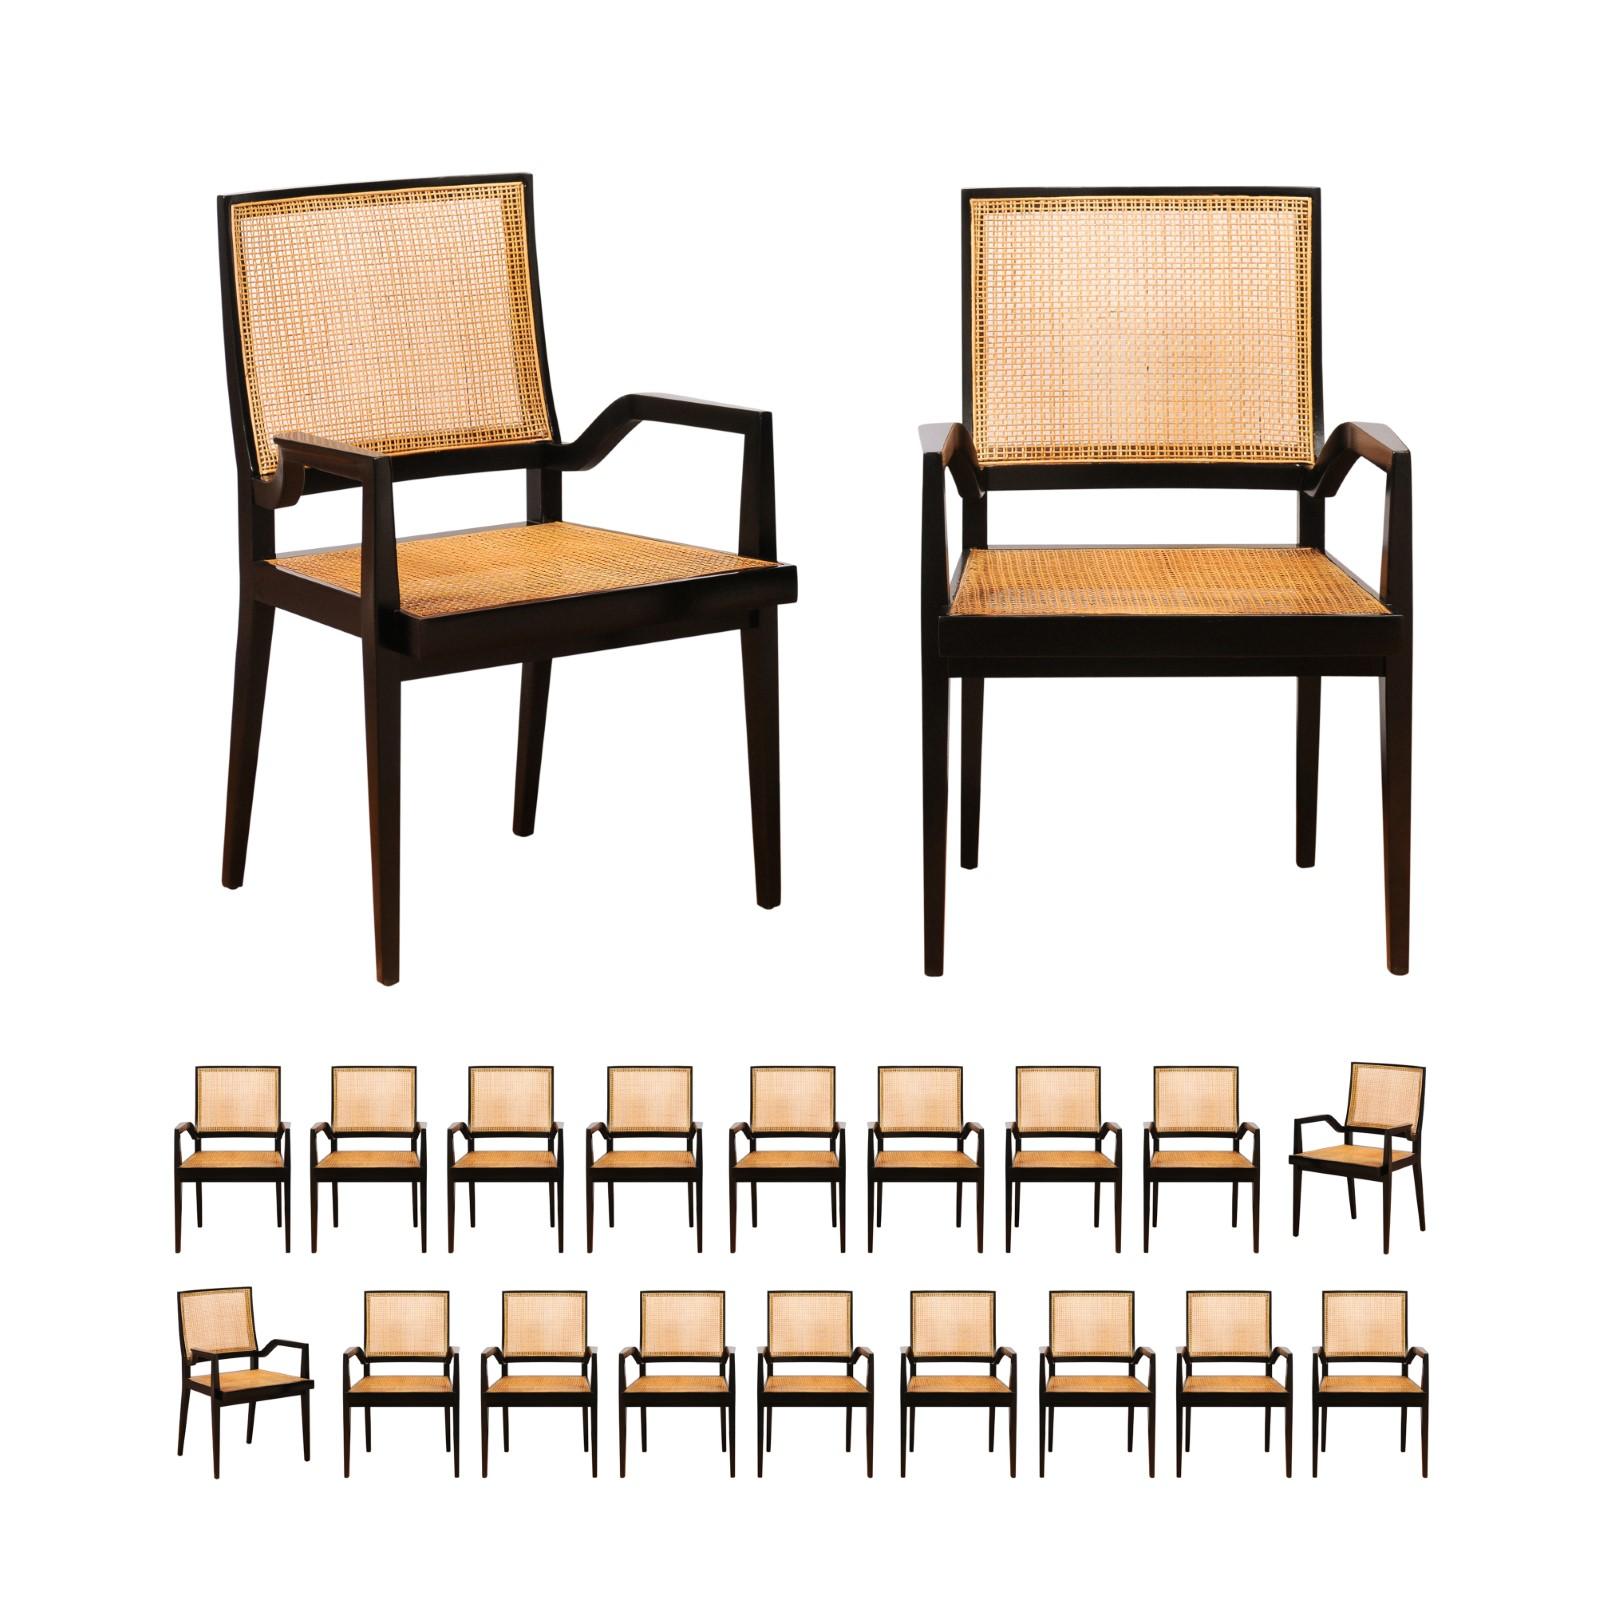 This large all arms set of impossible to find seating examples is unique on the world market. These magnificent dining chairs are shipped as professionally photographed and described in the listing narrative: meticulously professionally restored and